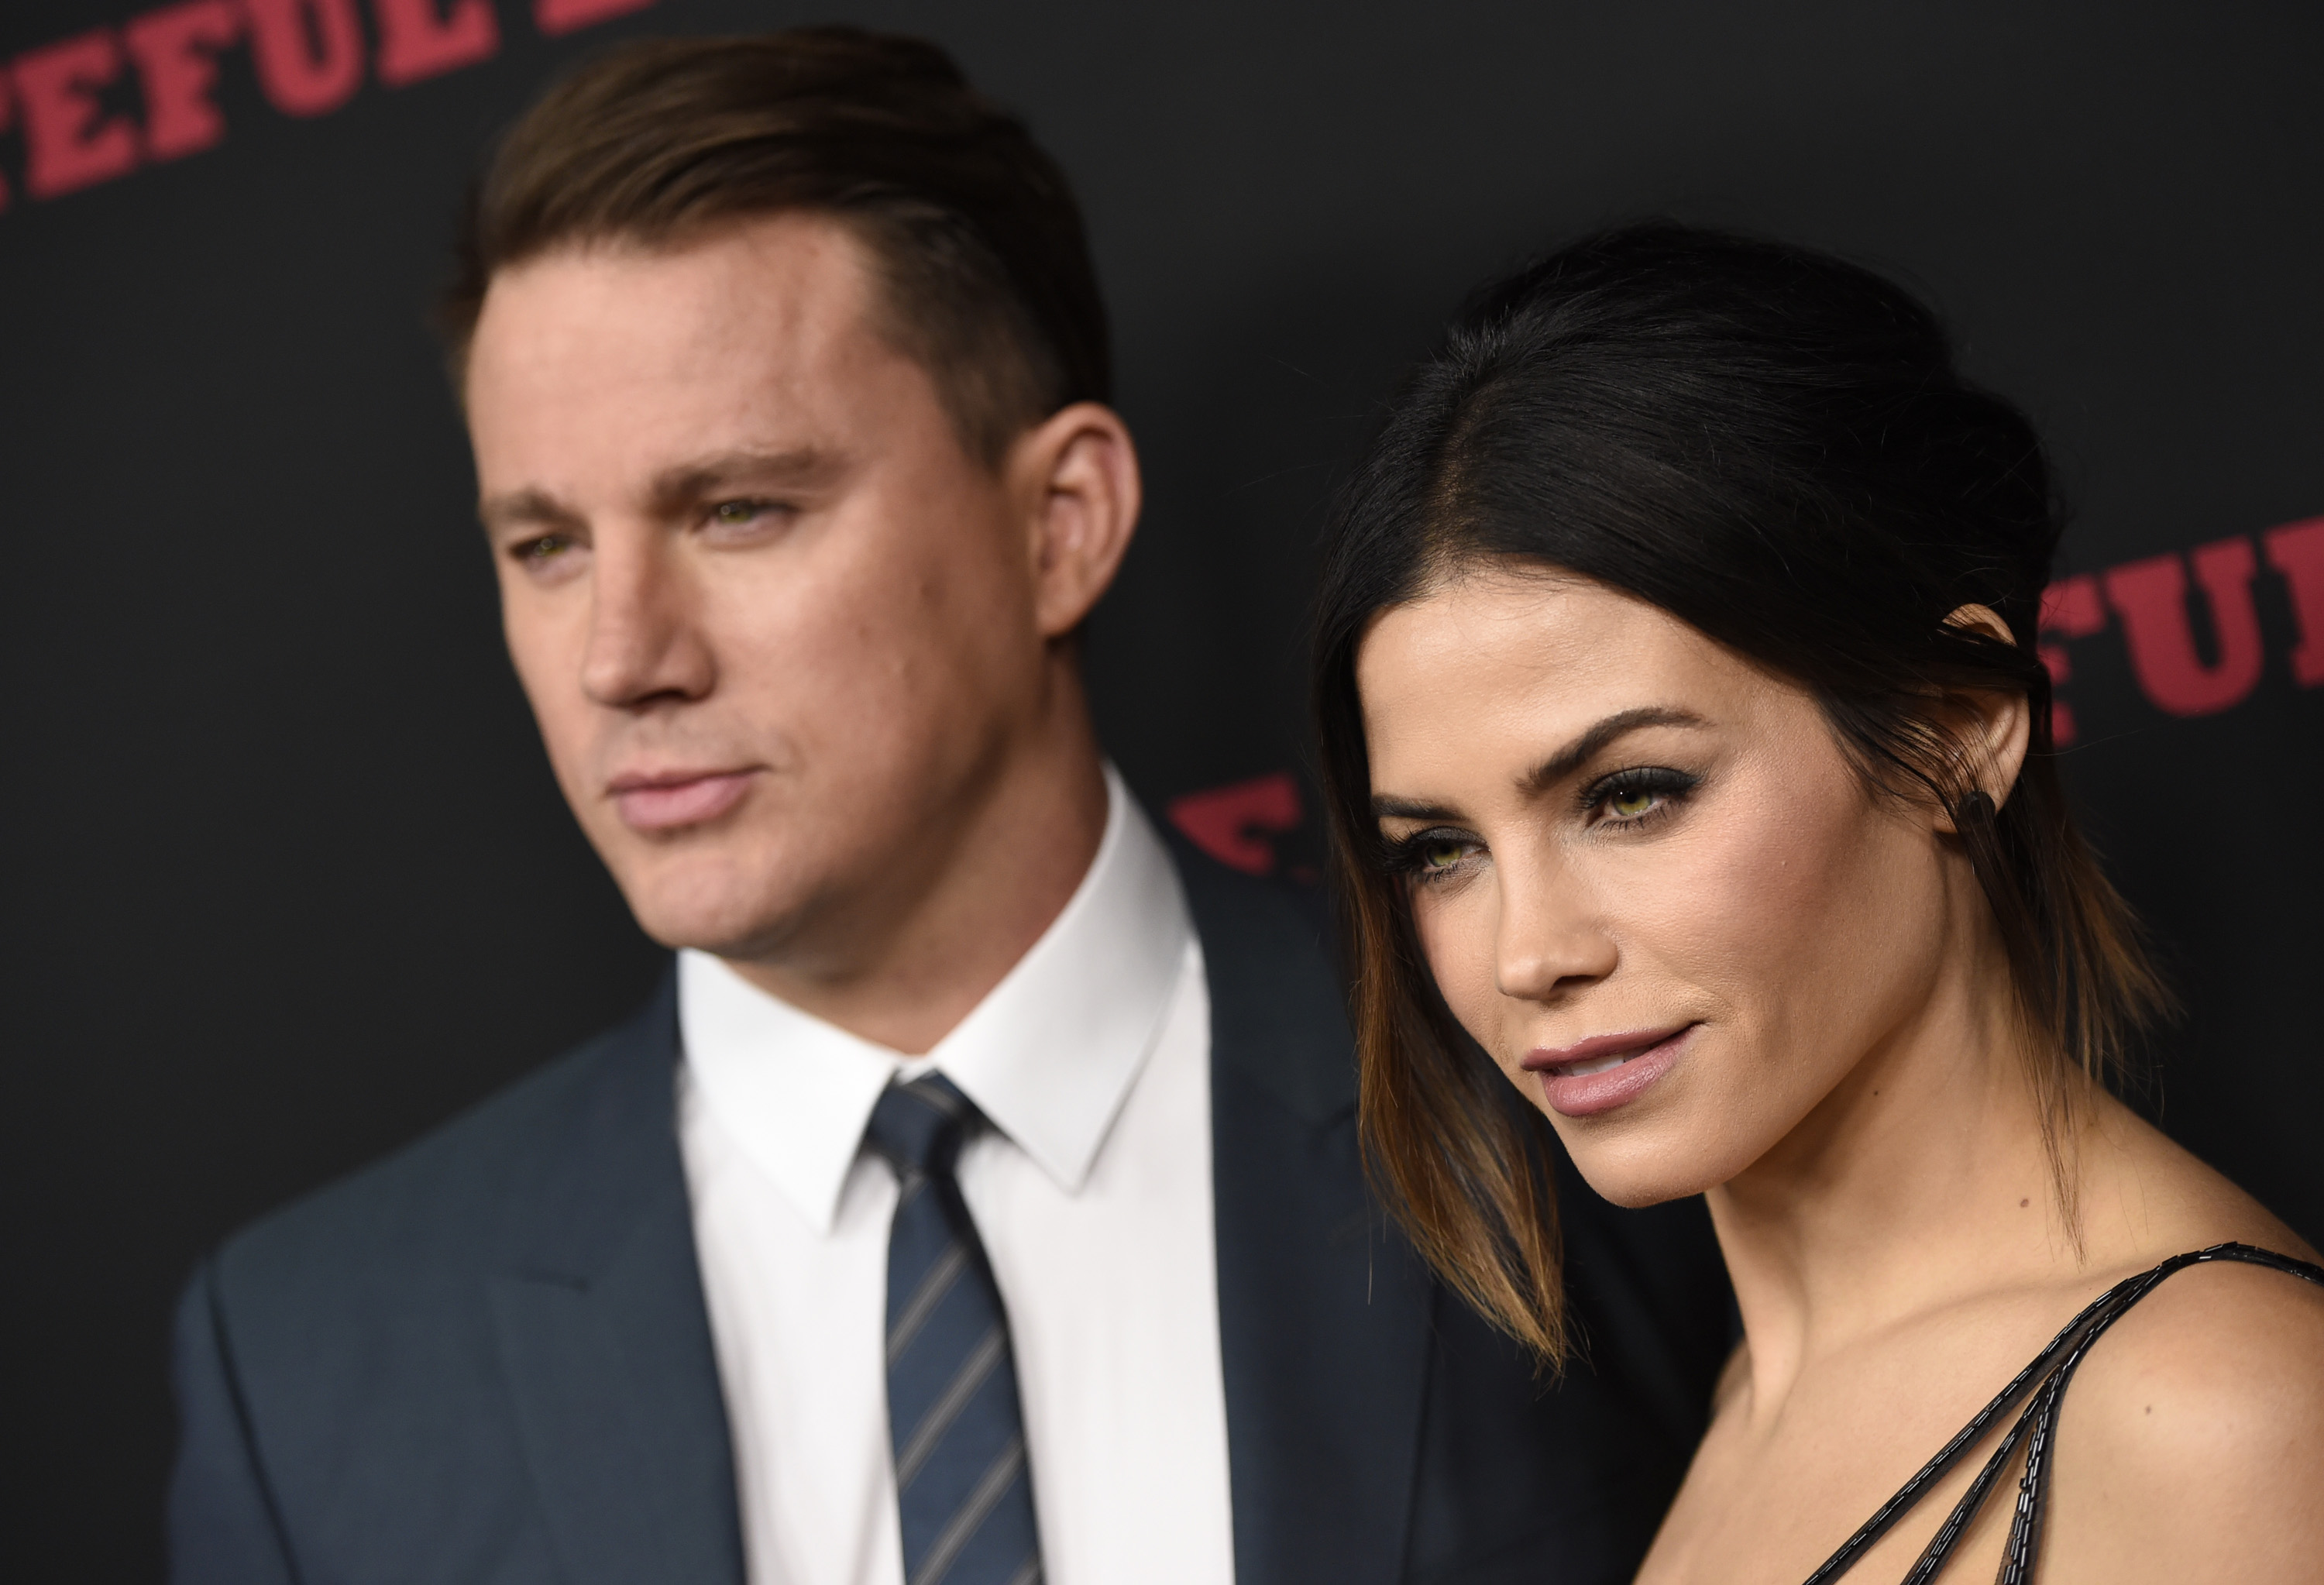 Channing Tatum shares naked snap of wife after she dished on their primal sex life